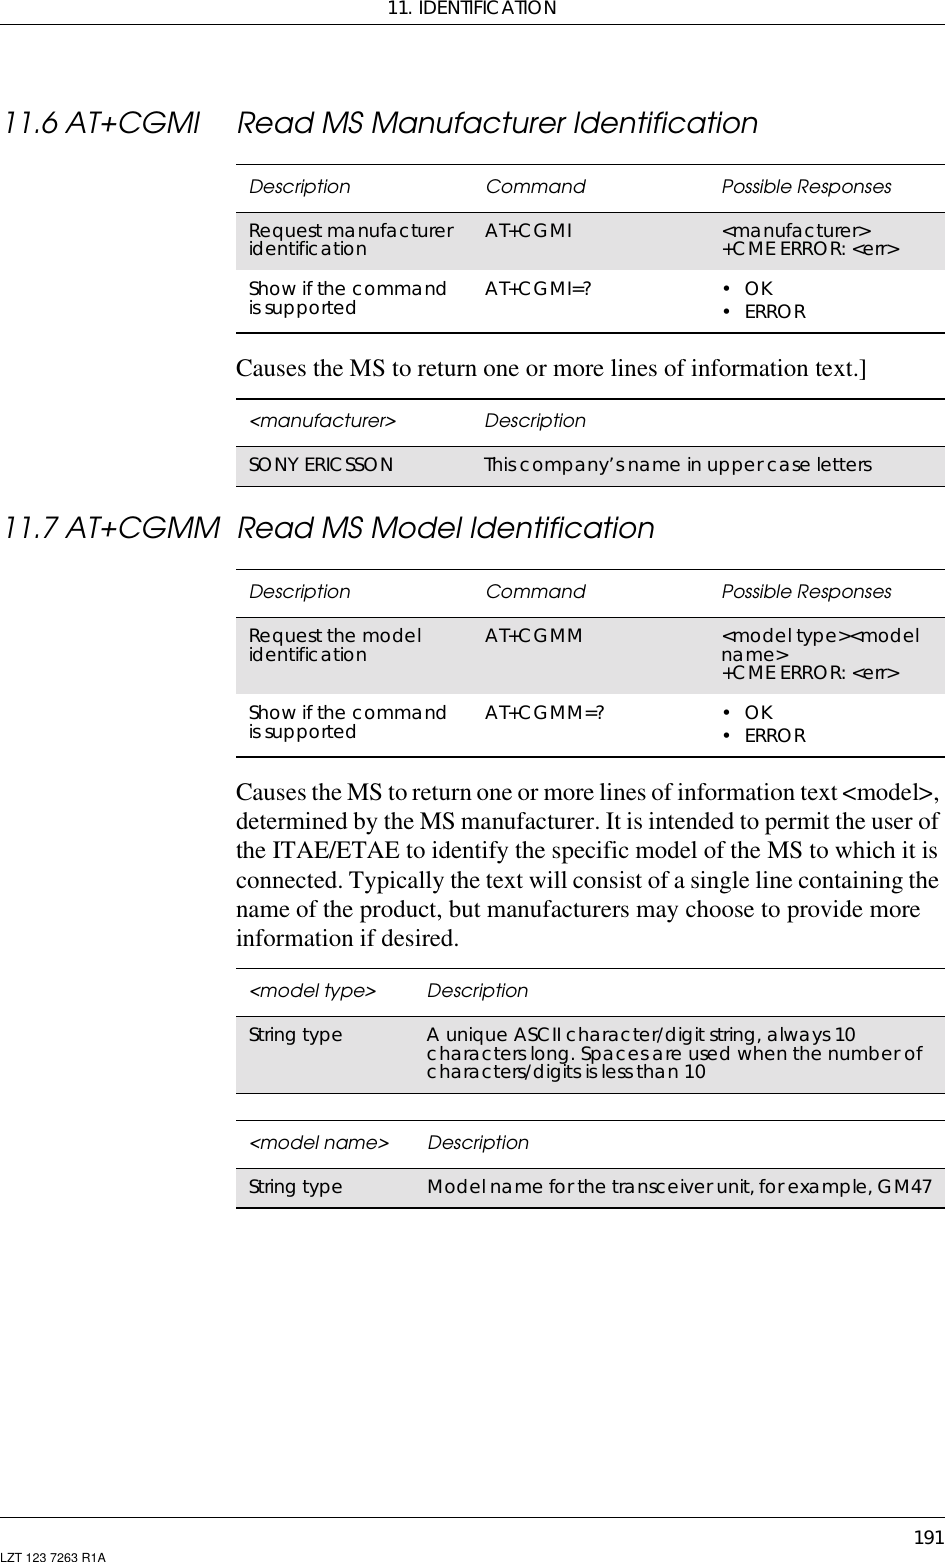 11. IDENTIFICATION191LZT 123 7263 R1A11.6 AT+CGMI Read MS Manufacturer IdentificationCauses the MS to return one or more lines of information text.]11.7 AT+CGMM Read MS Model IdentificationCauses the MS to return one or more lines of information text &lt;model&gt;,determined by the MS manufacturer. It is intended to permit the user ofthe ITAE/ETAE to identify the specific model of the MS to which it isconnected. Typically the text will consist of a single line containing thename of the product, but manufacturers may choose to provide moreinformation if desired.Description Command Possible ResponsesRequest manufactureridentification AT+CGMI &lt;manufacturer&gt;+CME ERROR: &lt;err&gt;Show if the commandis supported AT+CGMI=? •OK•ERROR&lt;manufacturer&gt; DescriptionSONY ERICSSON This company’s name in upper case lettersDescription Command Possible ResponsesRequest the modelidentification AT+CGMM &lt;model type&gt;&lt;modelname&gt;+CME ERROR: &lt;err&gt;Show if the commandis supported AT+CGMM=? •OK•ERROR&lt;model type&gt; DescriptionString type A unique ASCII character/digit string, always 10characters long. Spaces are used when the number ofcharacters/digitsislessthan10&lt;model name&gt; DescriptionString type Model name for the transceiver unit, for example, GM47